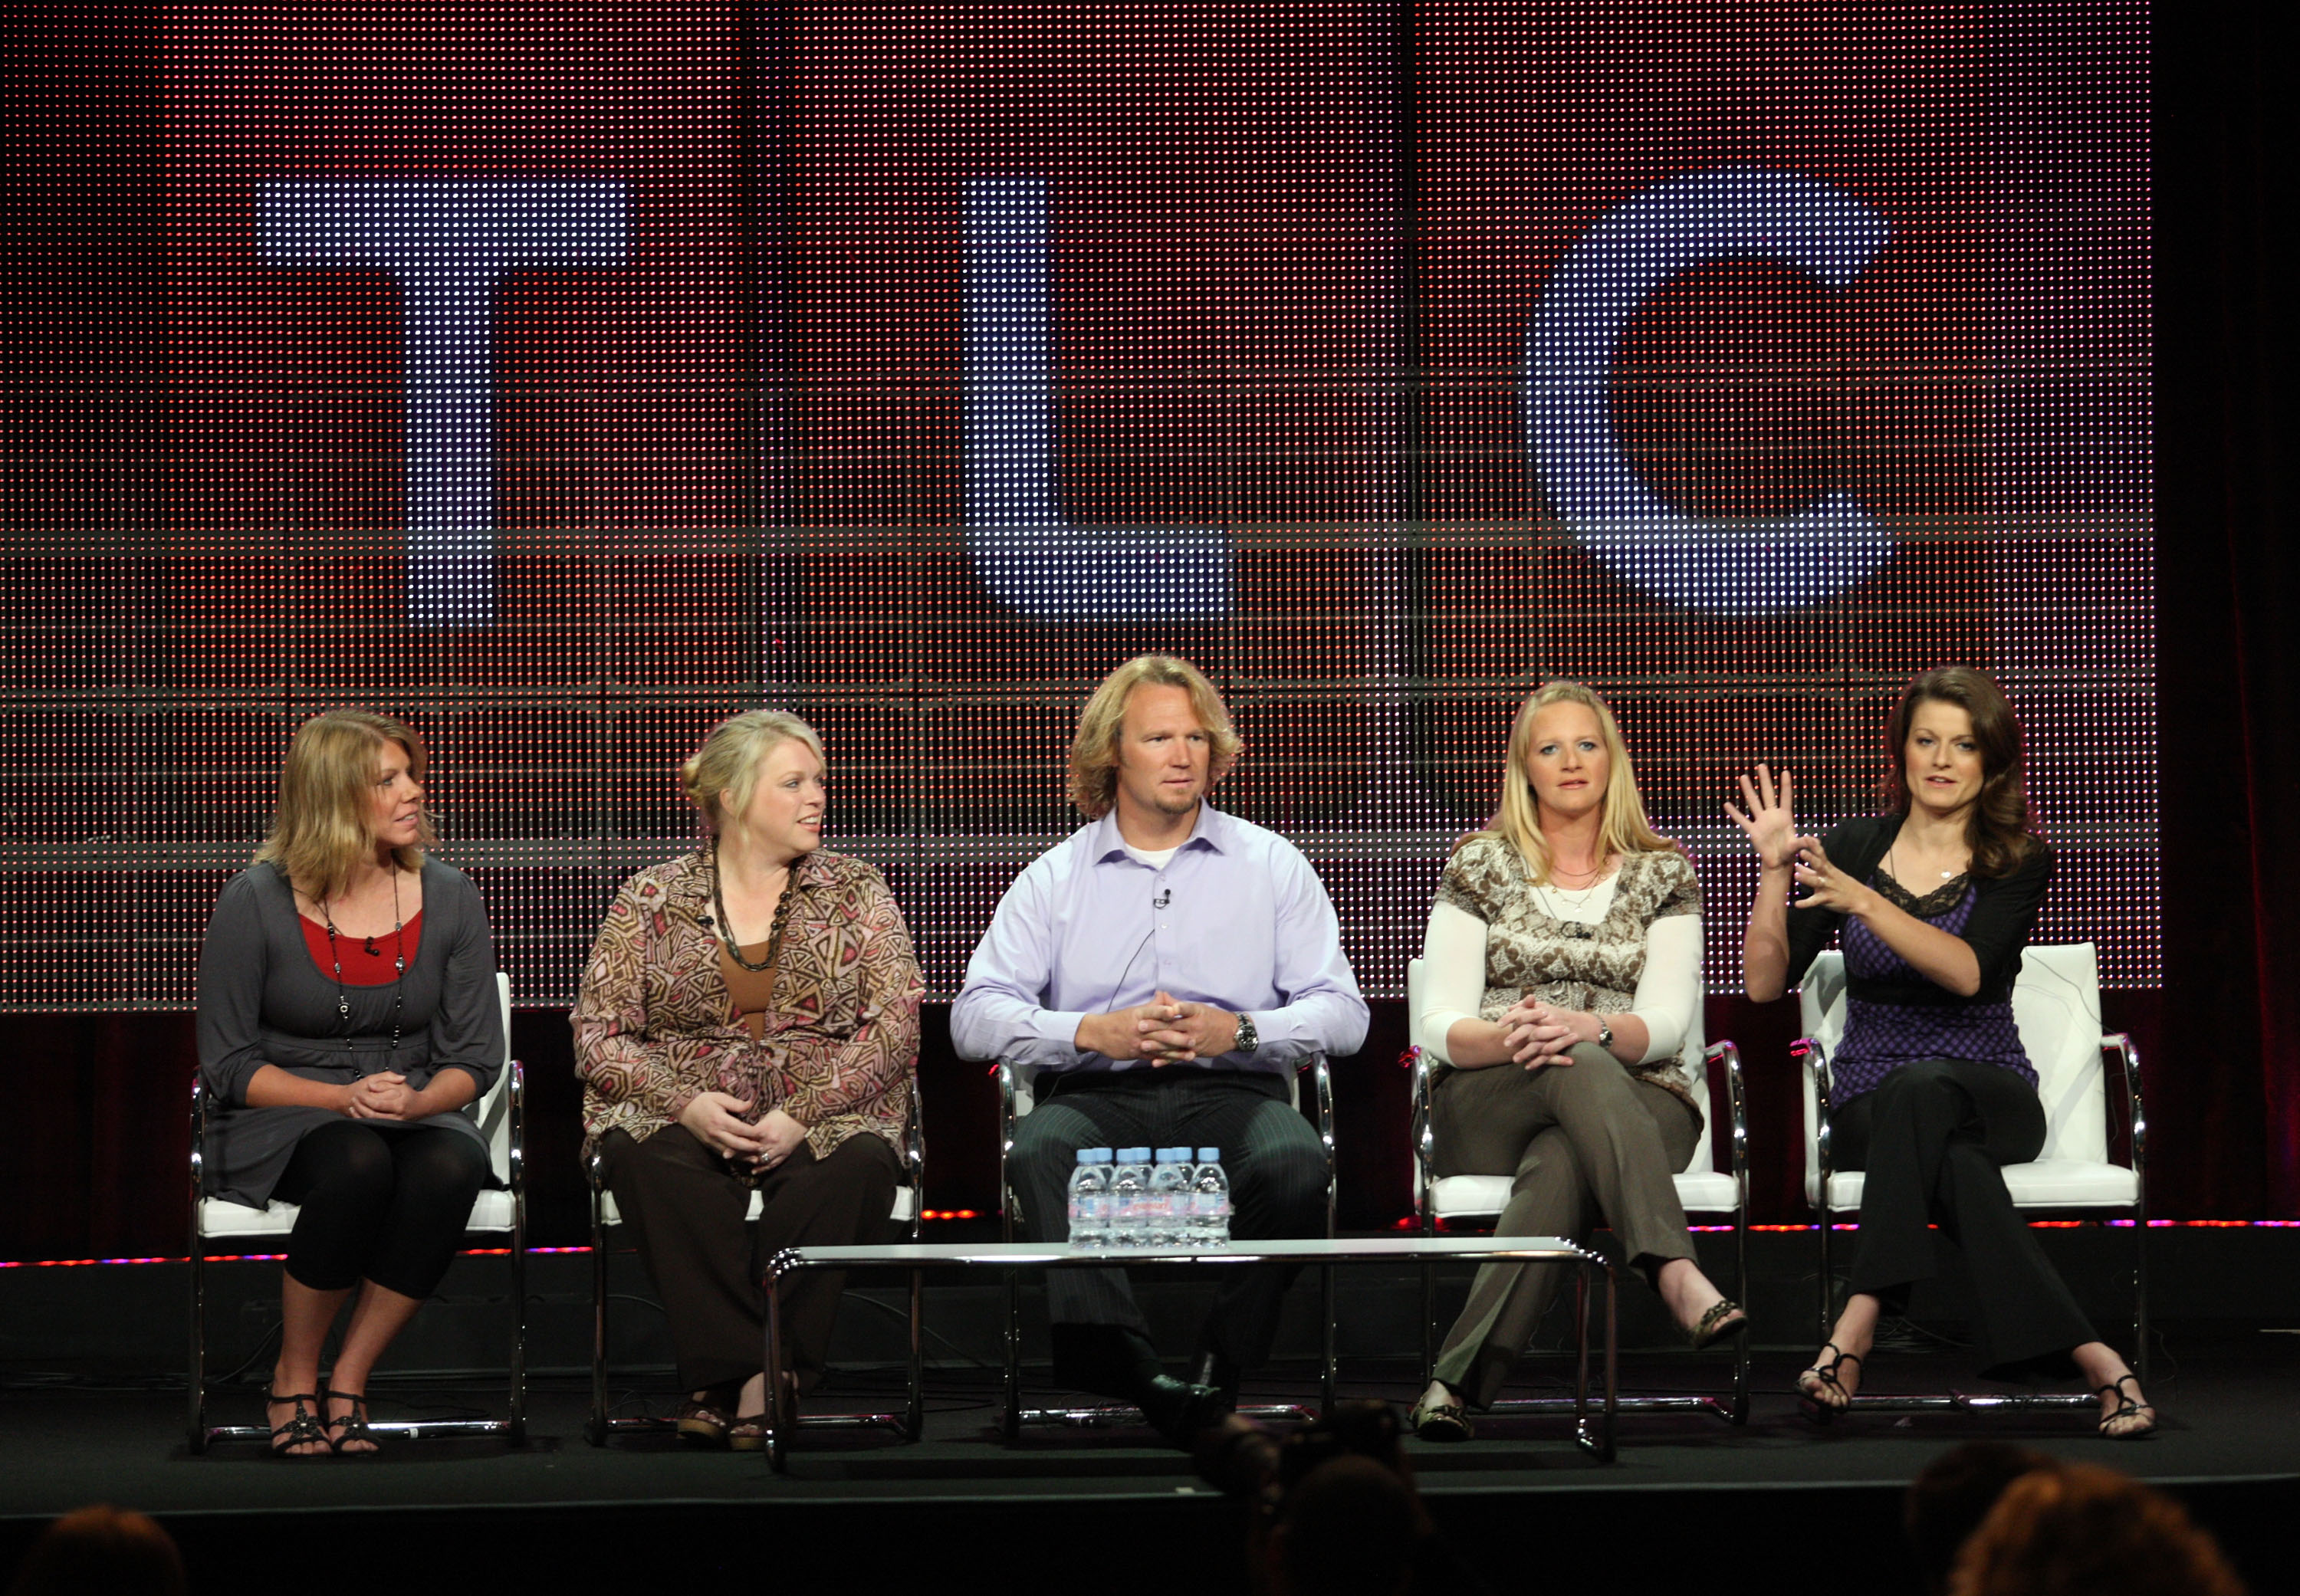 Meri Brown, Janelle Brown, Kody Brown, Christine Brown and Robyn Brown appear at the 2010 Summer TCA Press Tour to promote 'Sister Wives'